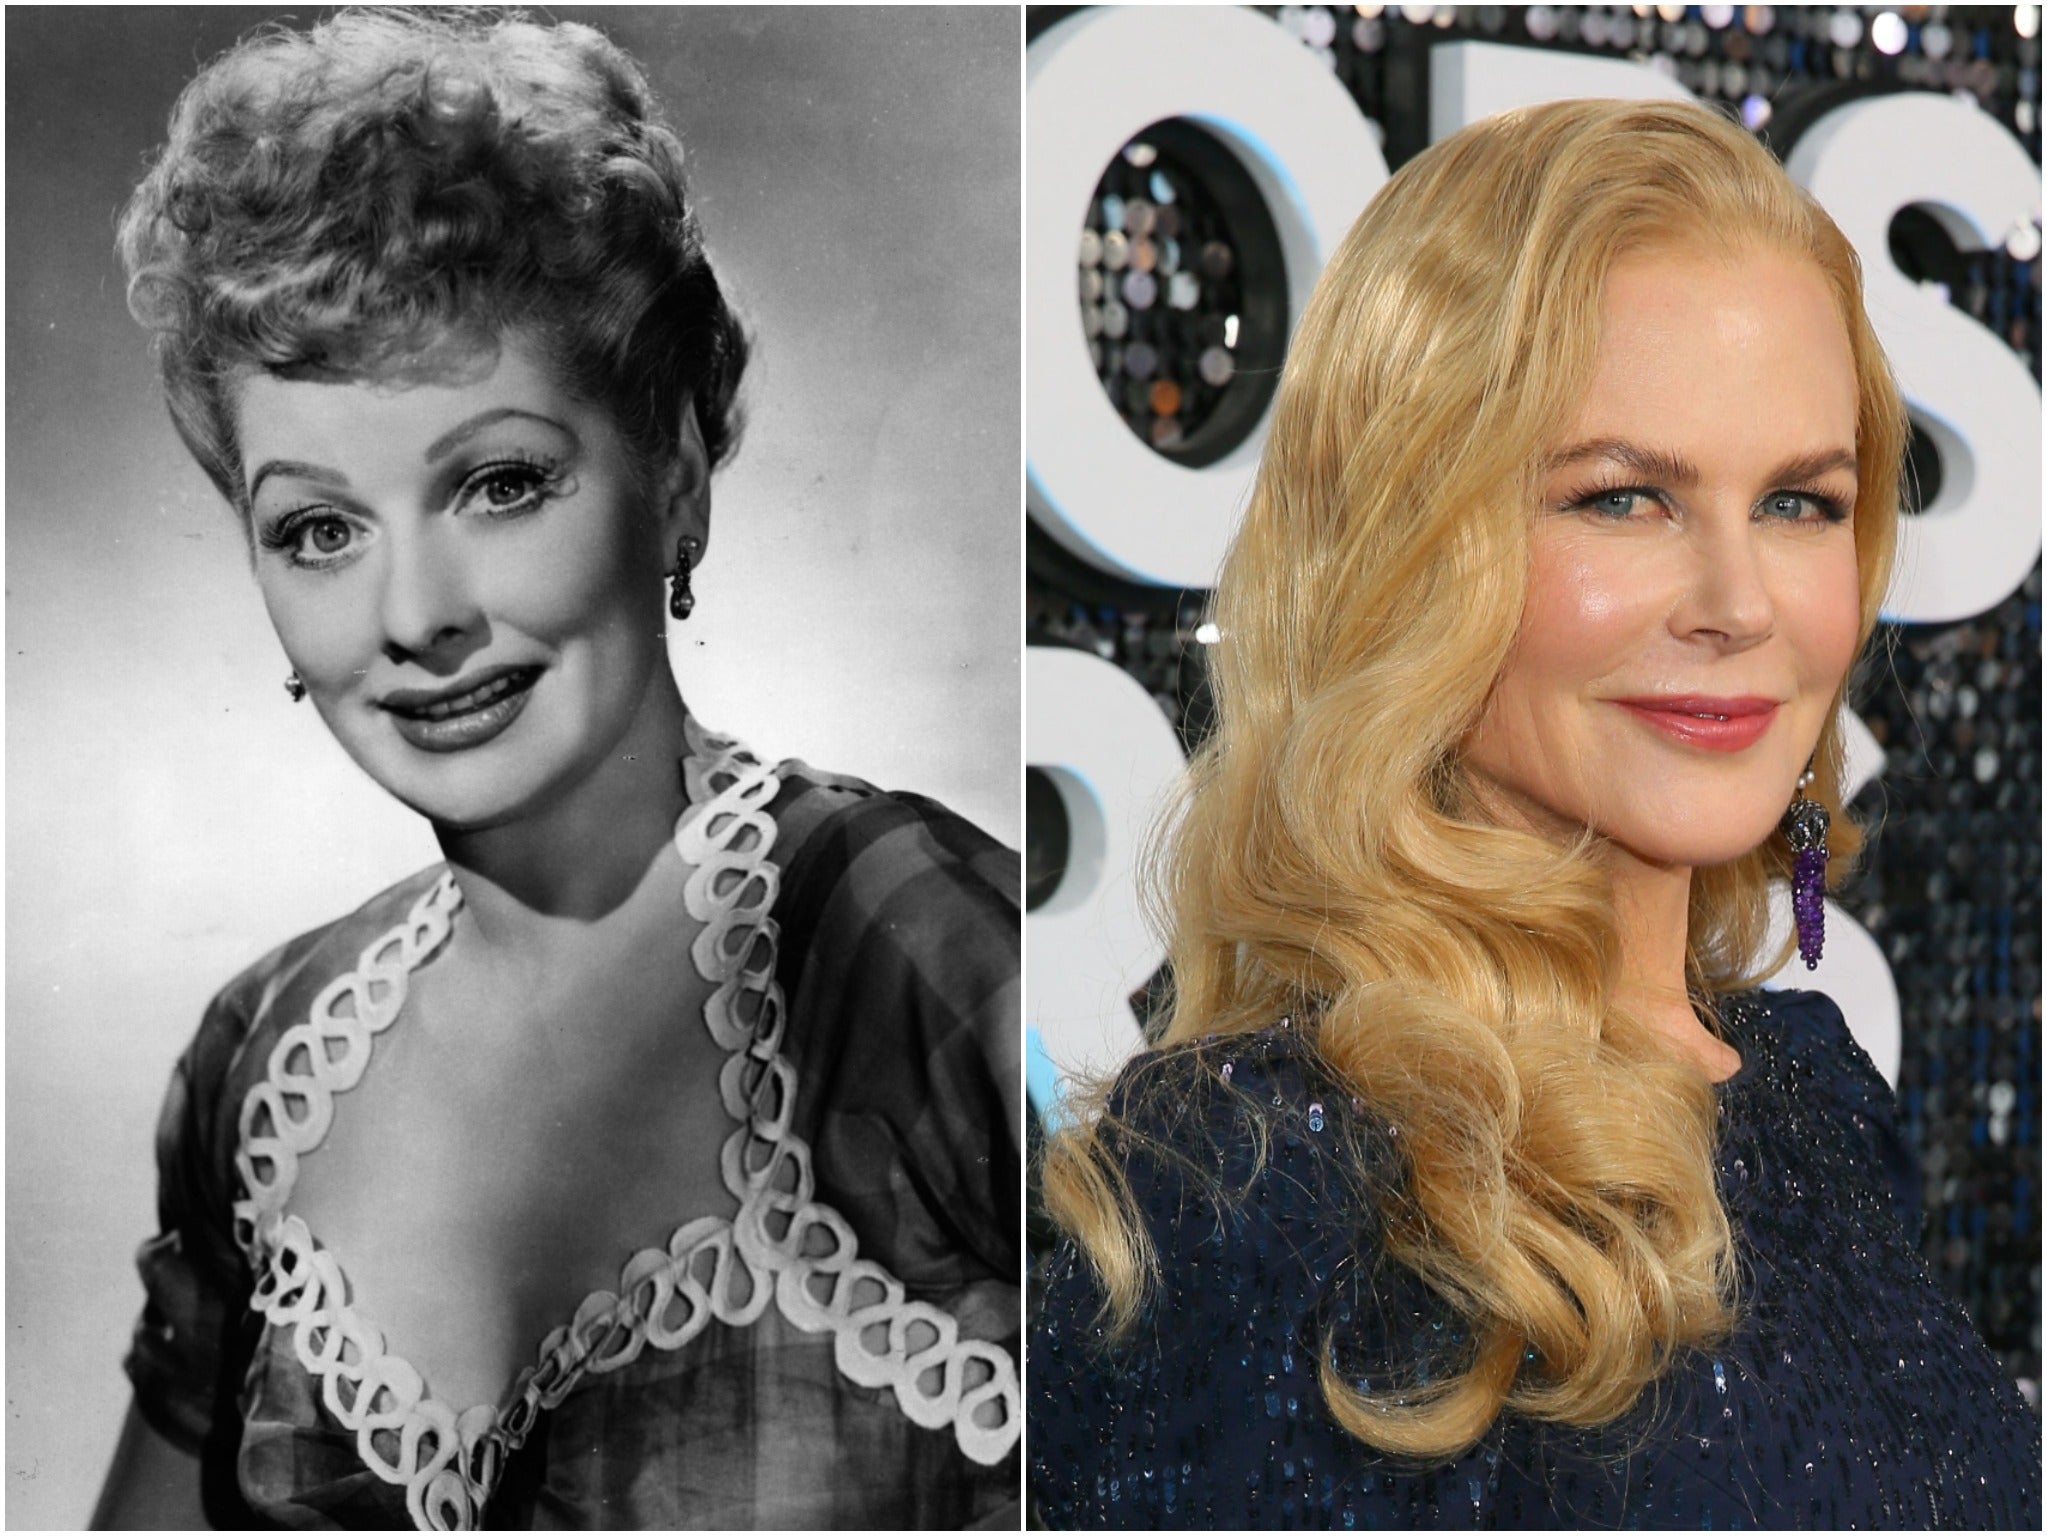 Kidman will portray Lucille Ball (left) in ‘Being the Ricardos'